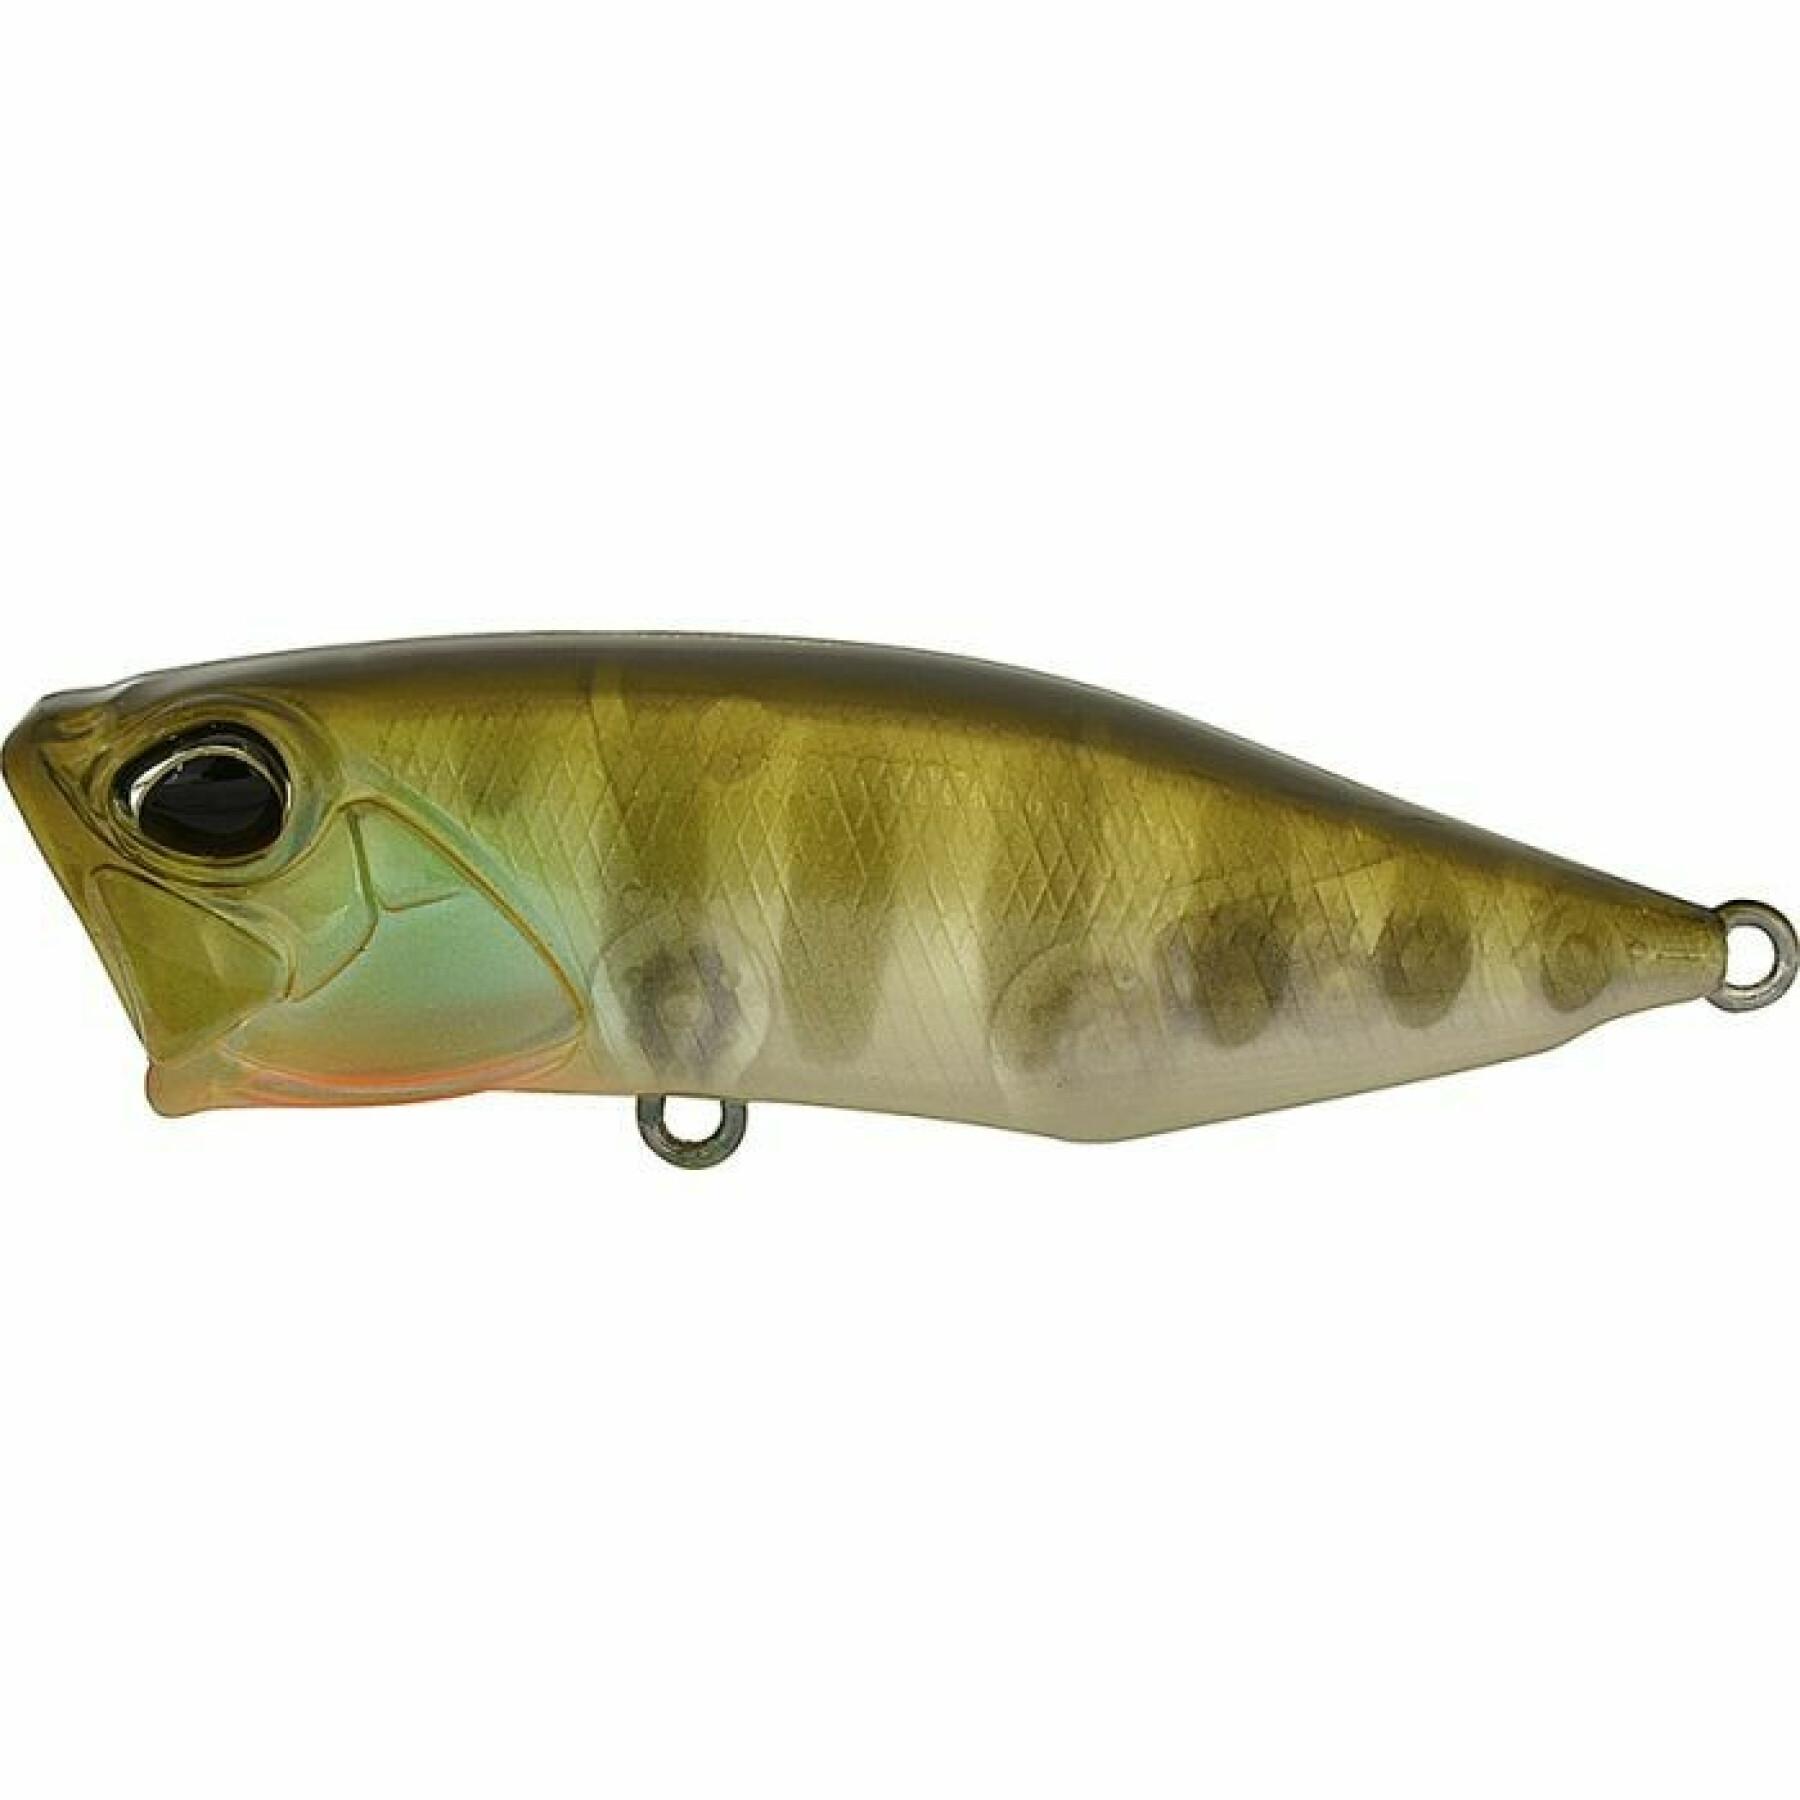 Duo popper 64 realis lure - 9g